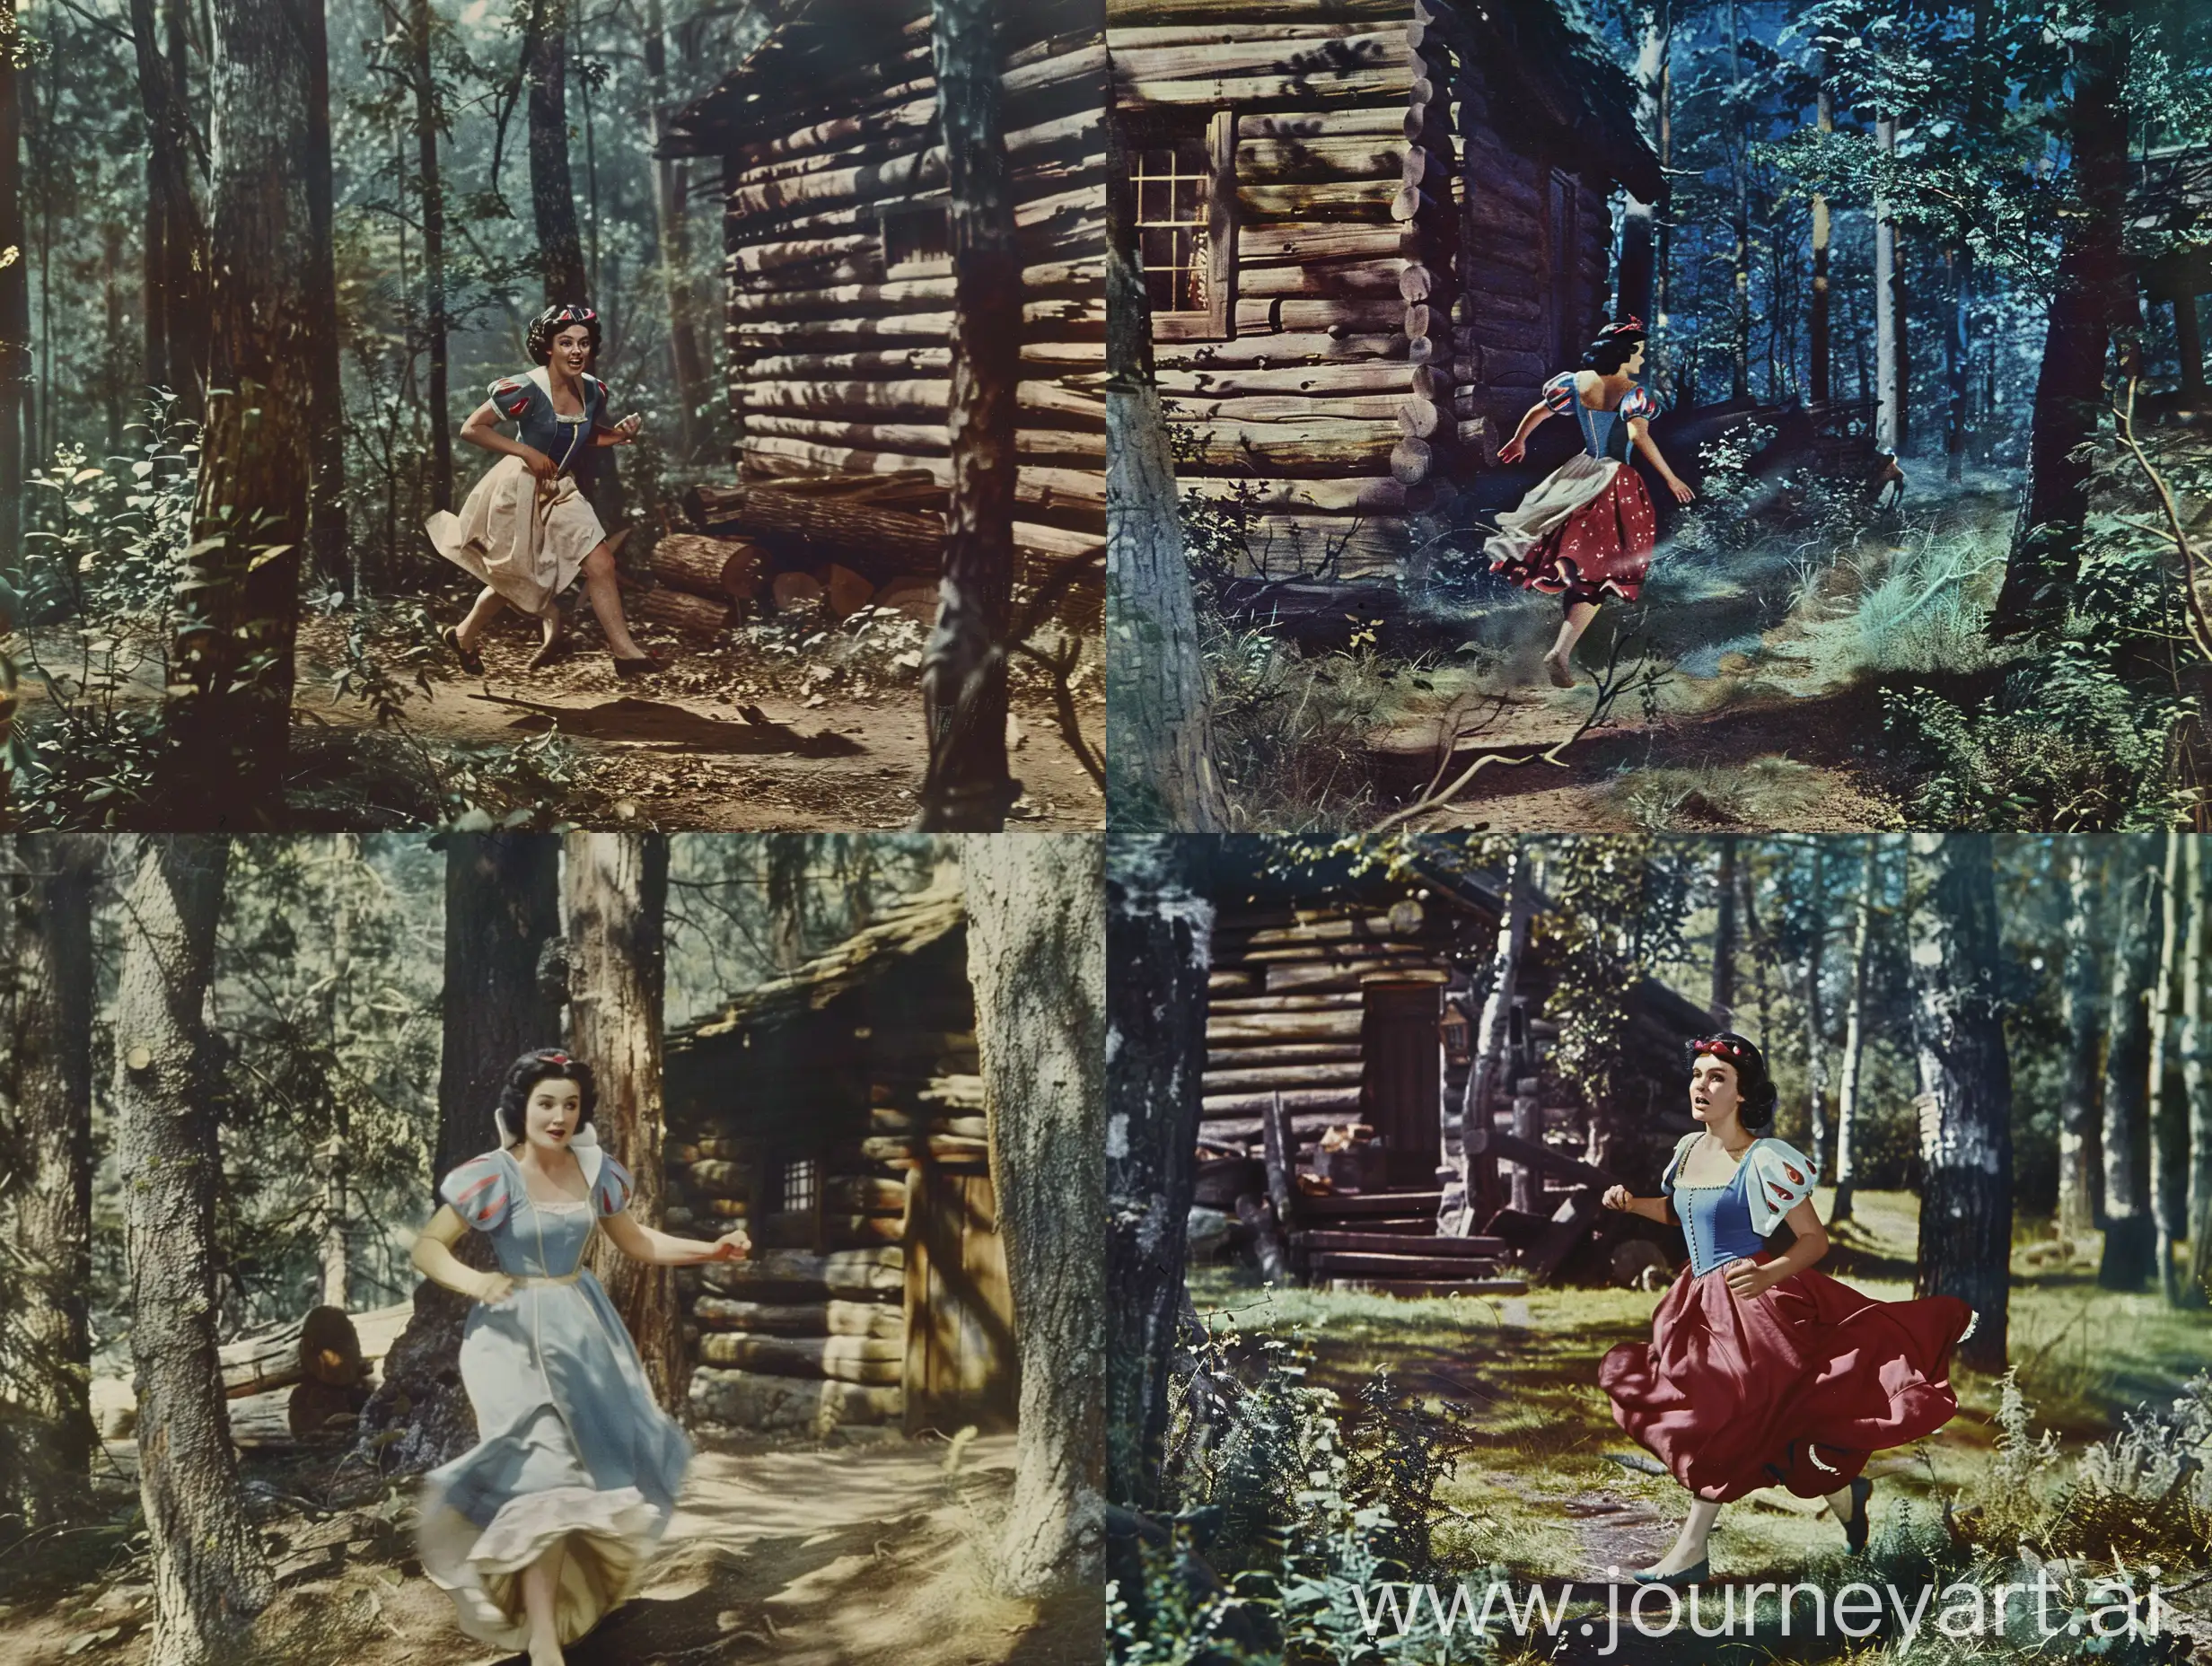 elizabeth taylor as snow white is running through the forest towards a log cabin and looks back with fear,1950's super panavision 70 , vintage color
